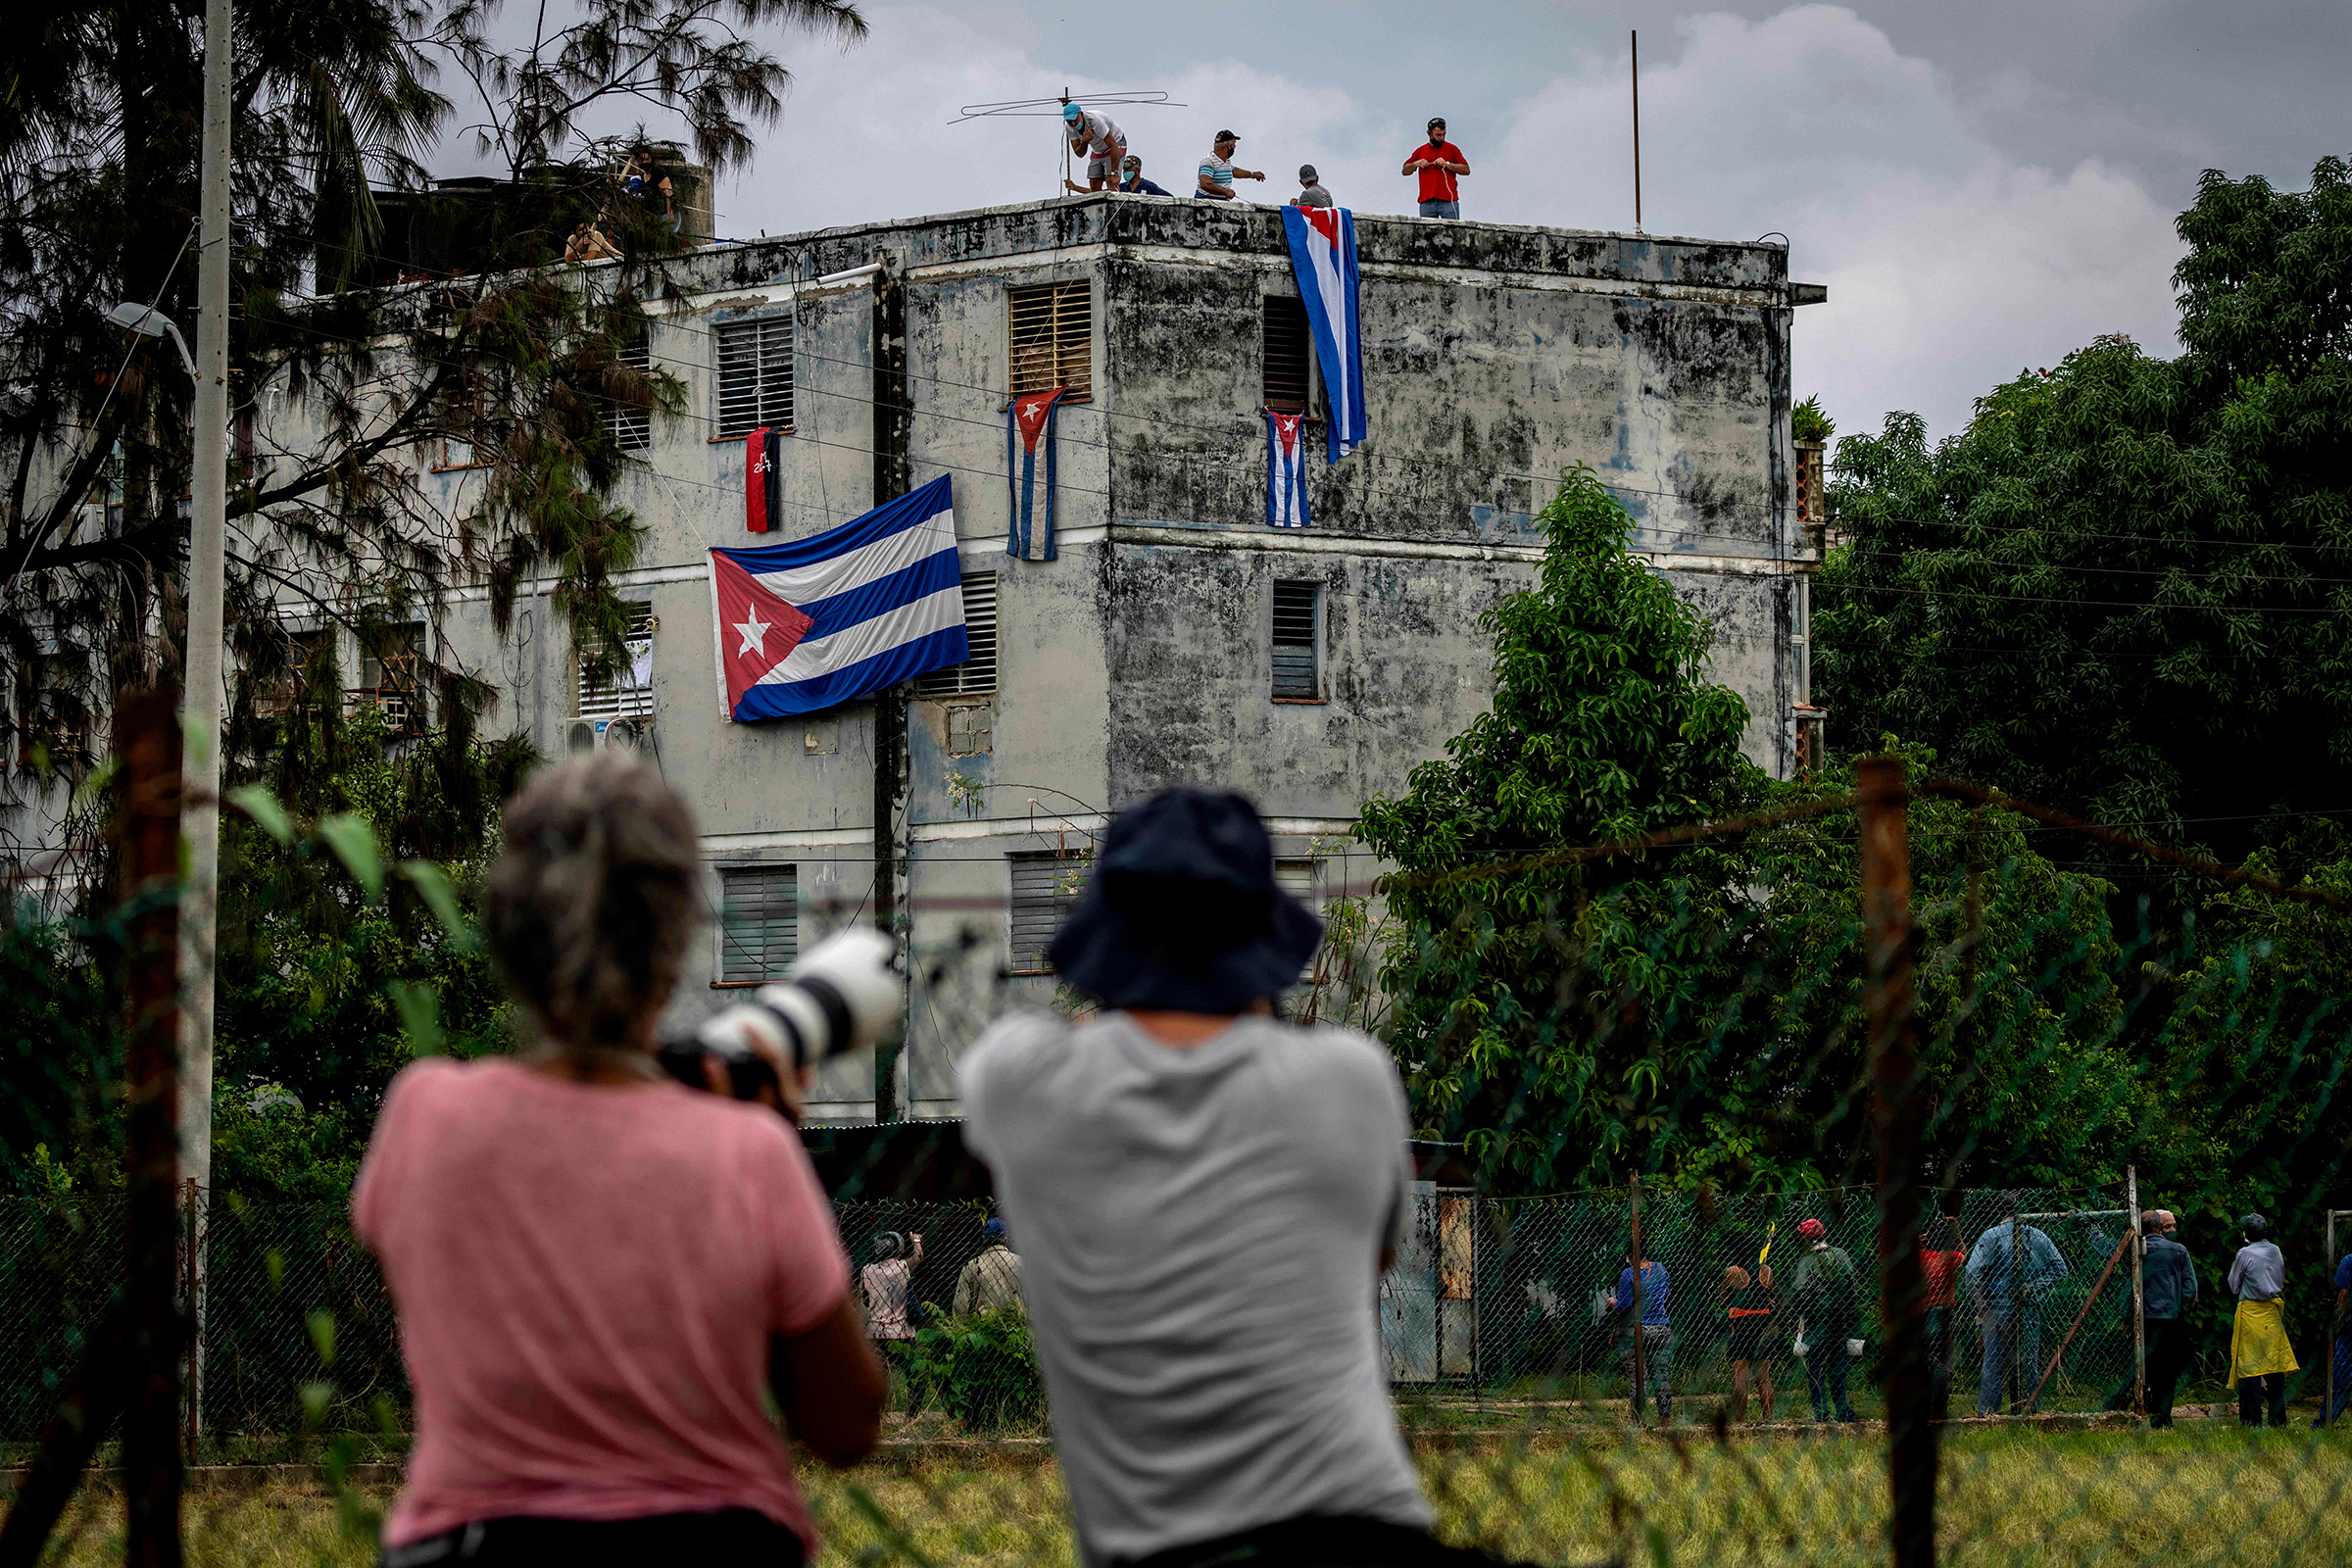 Men hang Cuban flags over the windows of Yunior Garcia Aguilera's home in an attempt to stop him from communicating with the outside on Nov. 14, 2021. García is a playwright and leader of Archipelago, a Cuban opposition group. (Ramon Espinosa—AP)